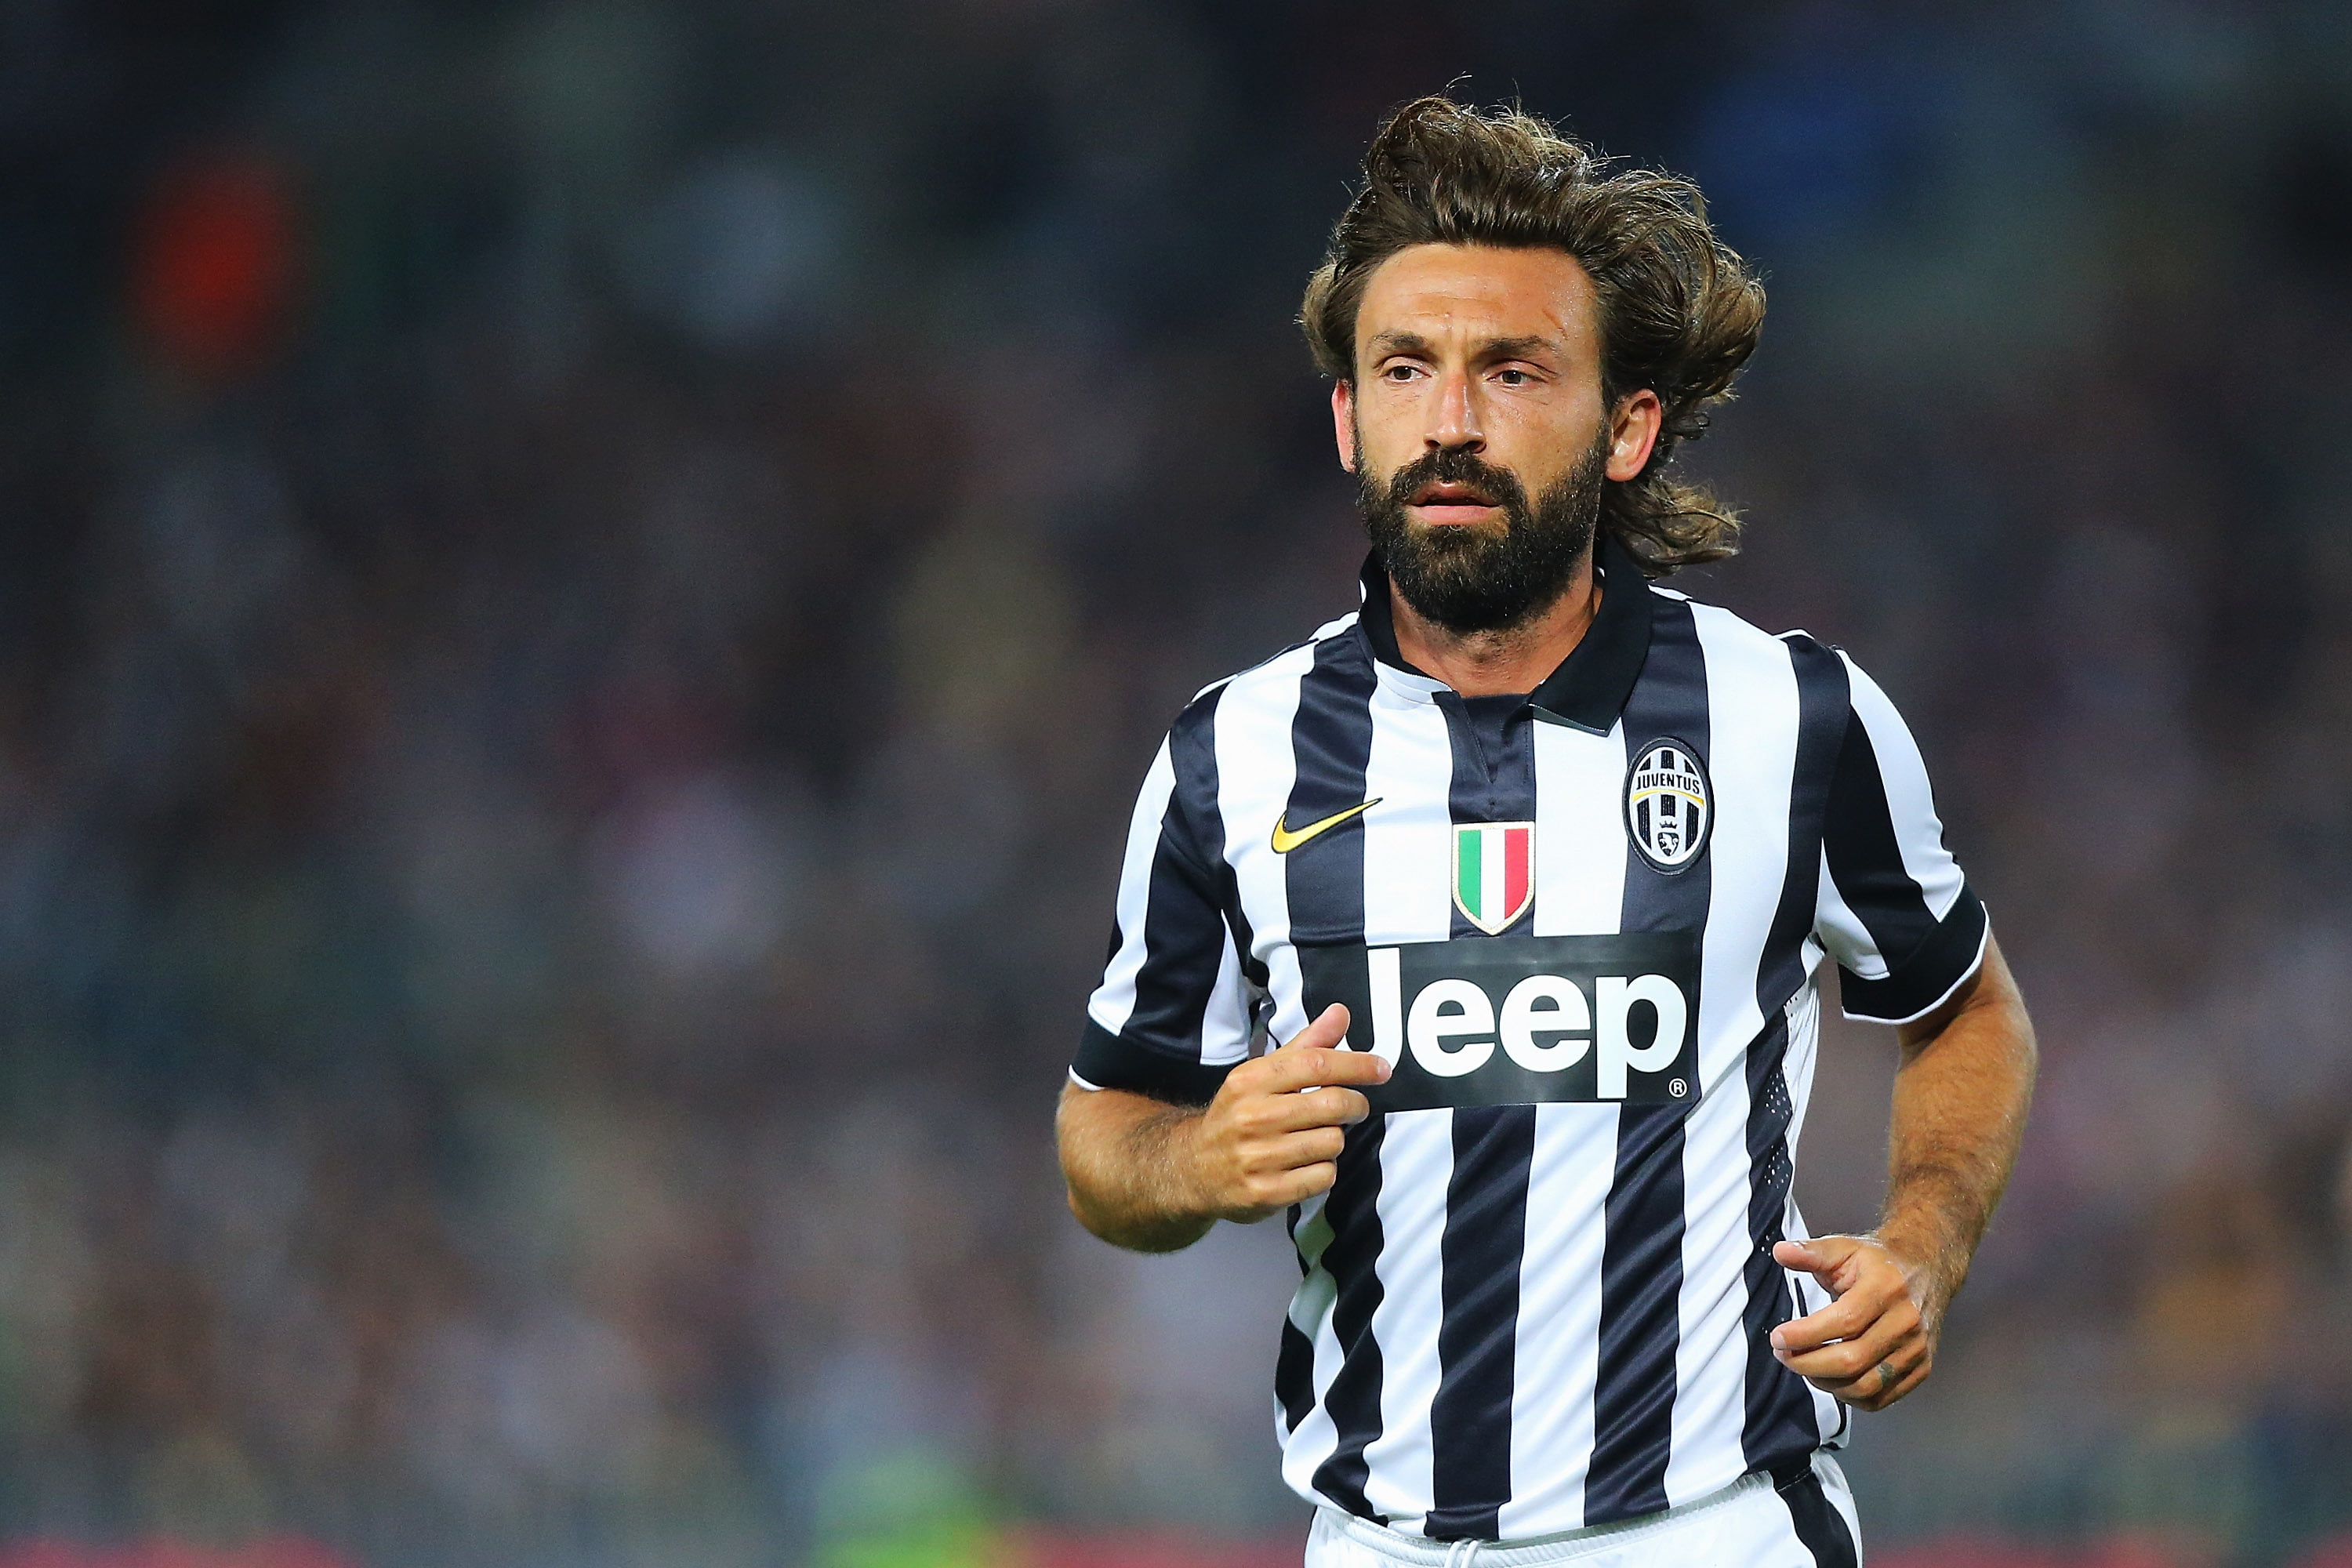 black and white soccer jersey, pirlo, juventus, football player